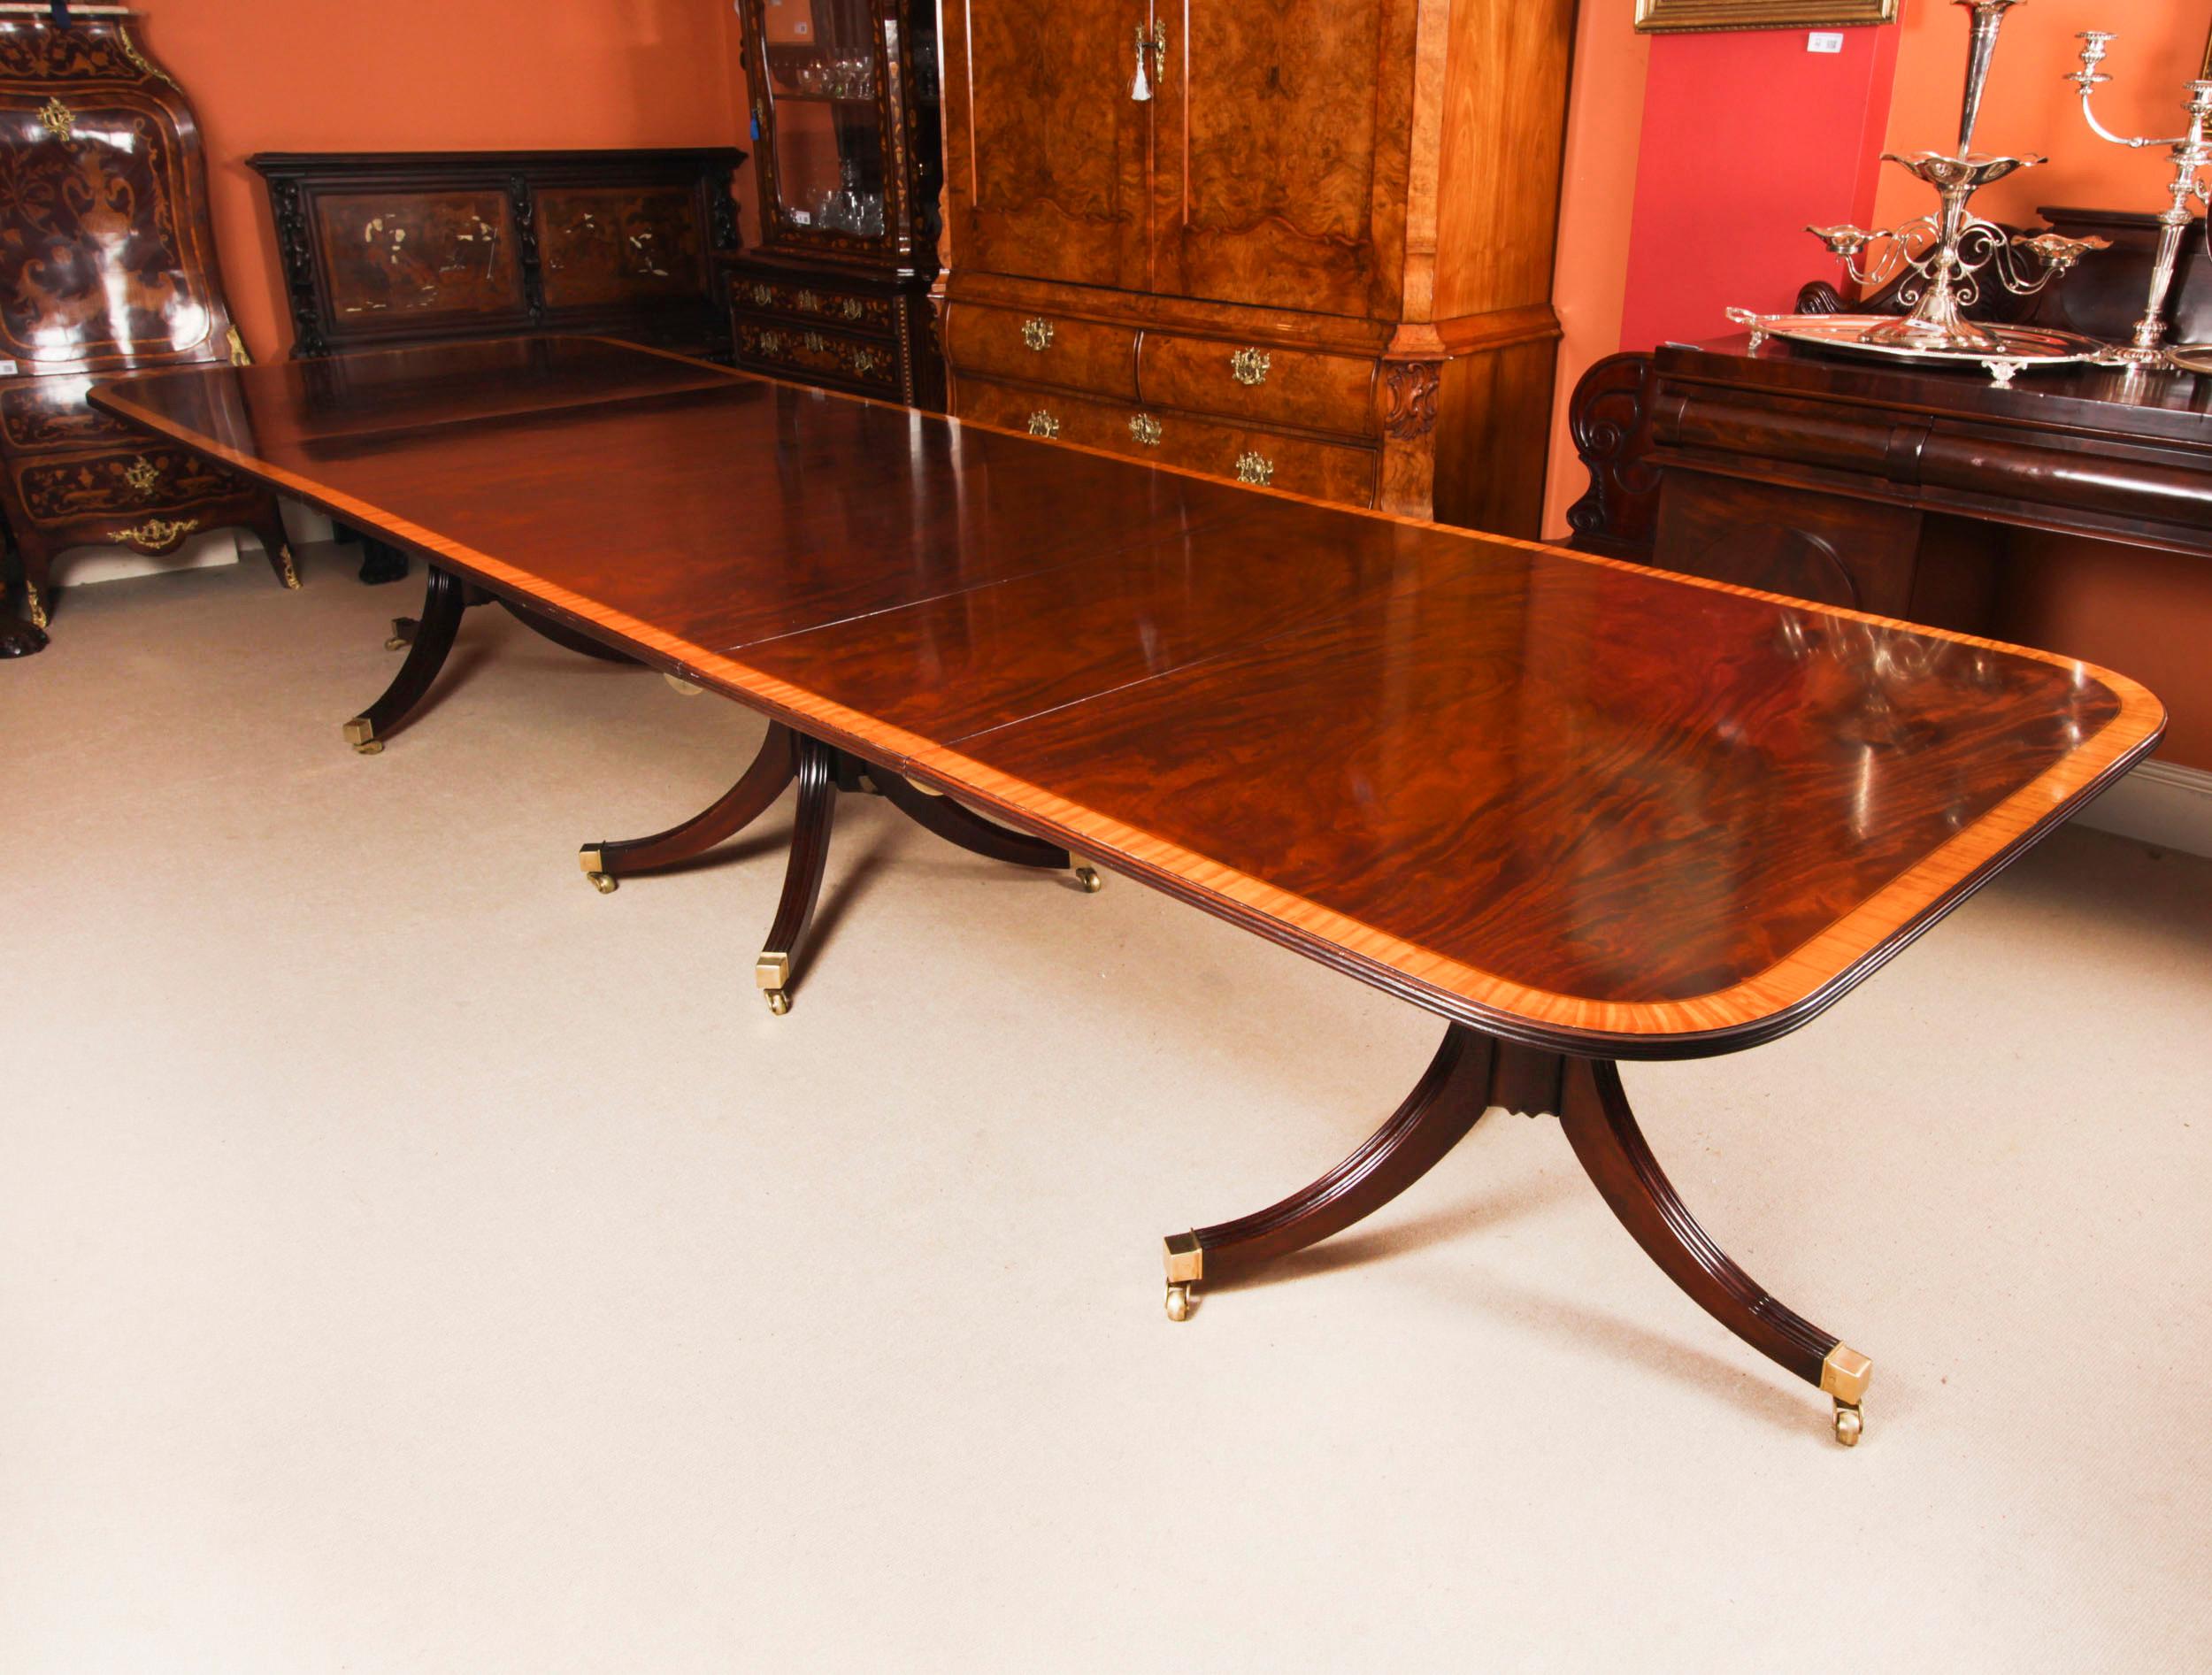 Vintage 13 ft Three Pillar Mahogany Dining Table and 14 Chairs 20th Century  In Good Condition For Sale In London, GB